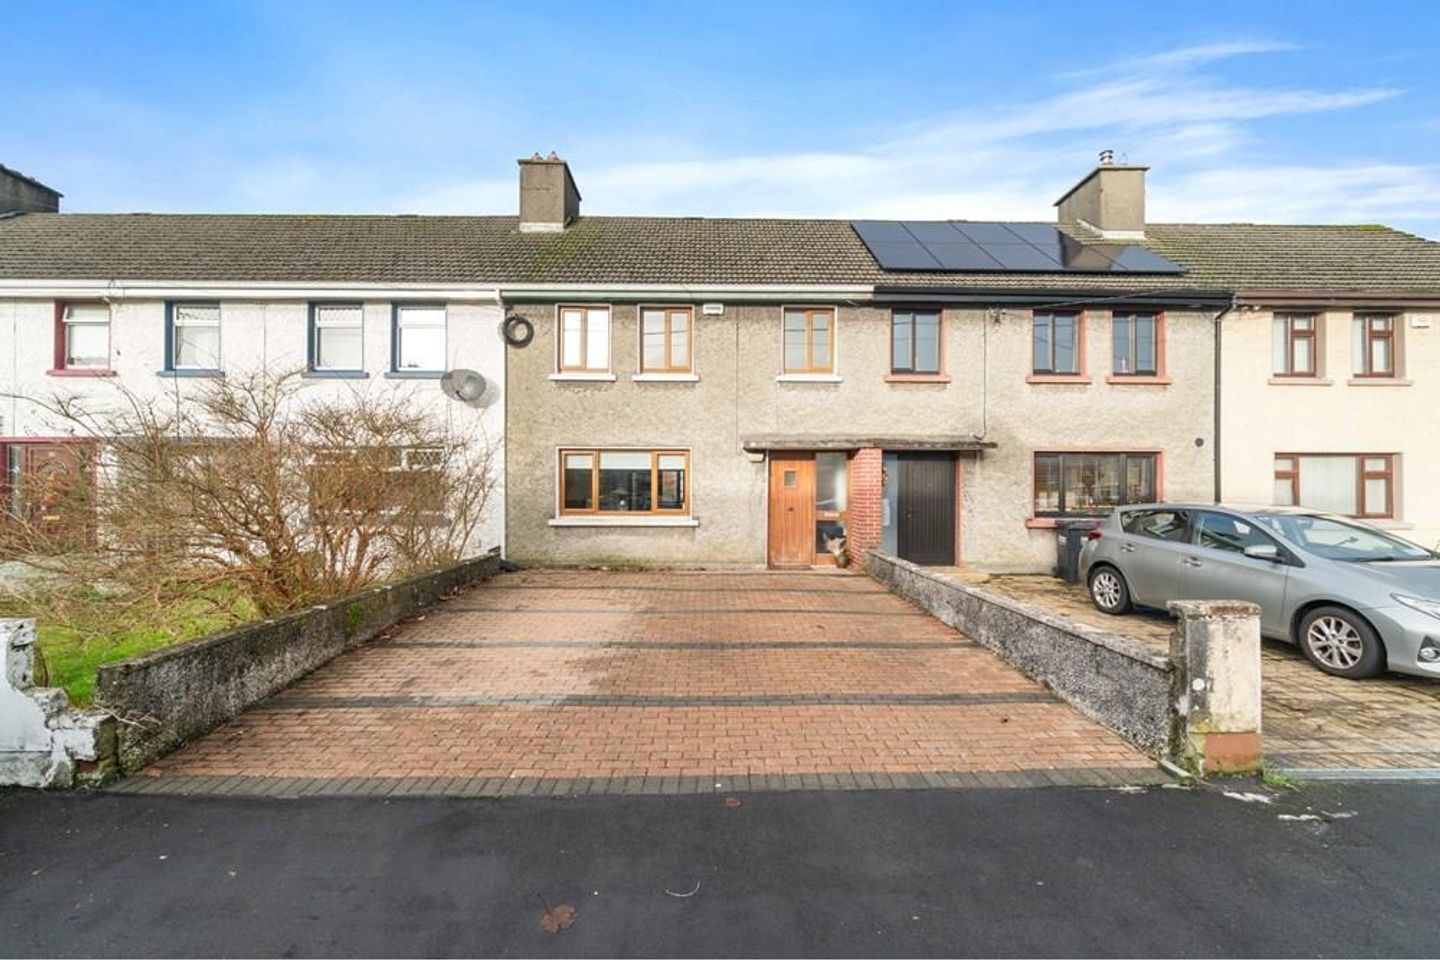 28 Parnell Ave, Mervue, Co. Galway, H91YV8R